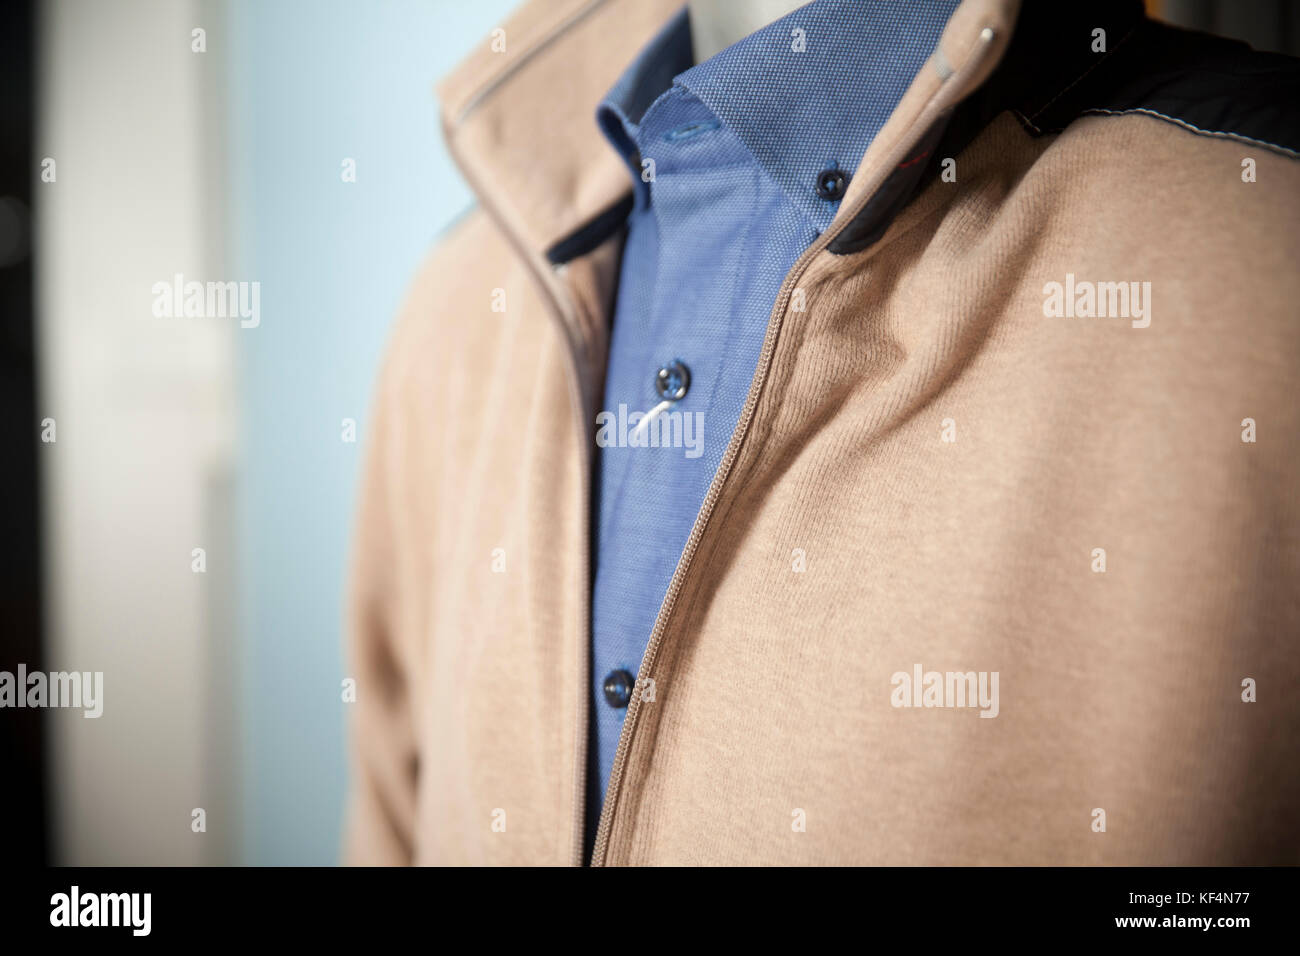 sweater and shirt on a mannequin, close up Stock Photo